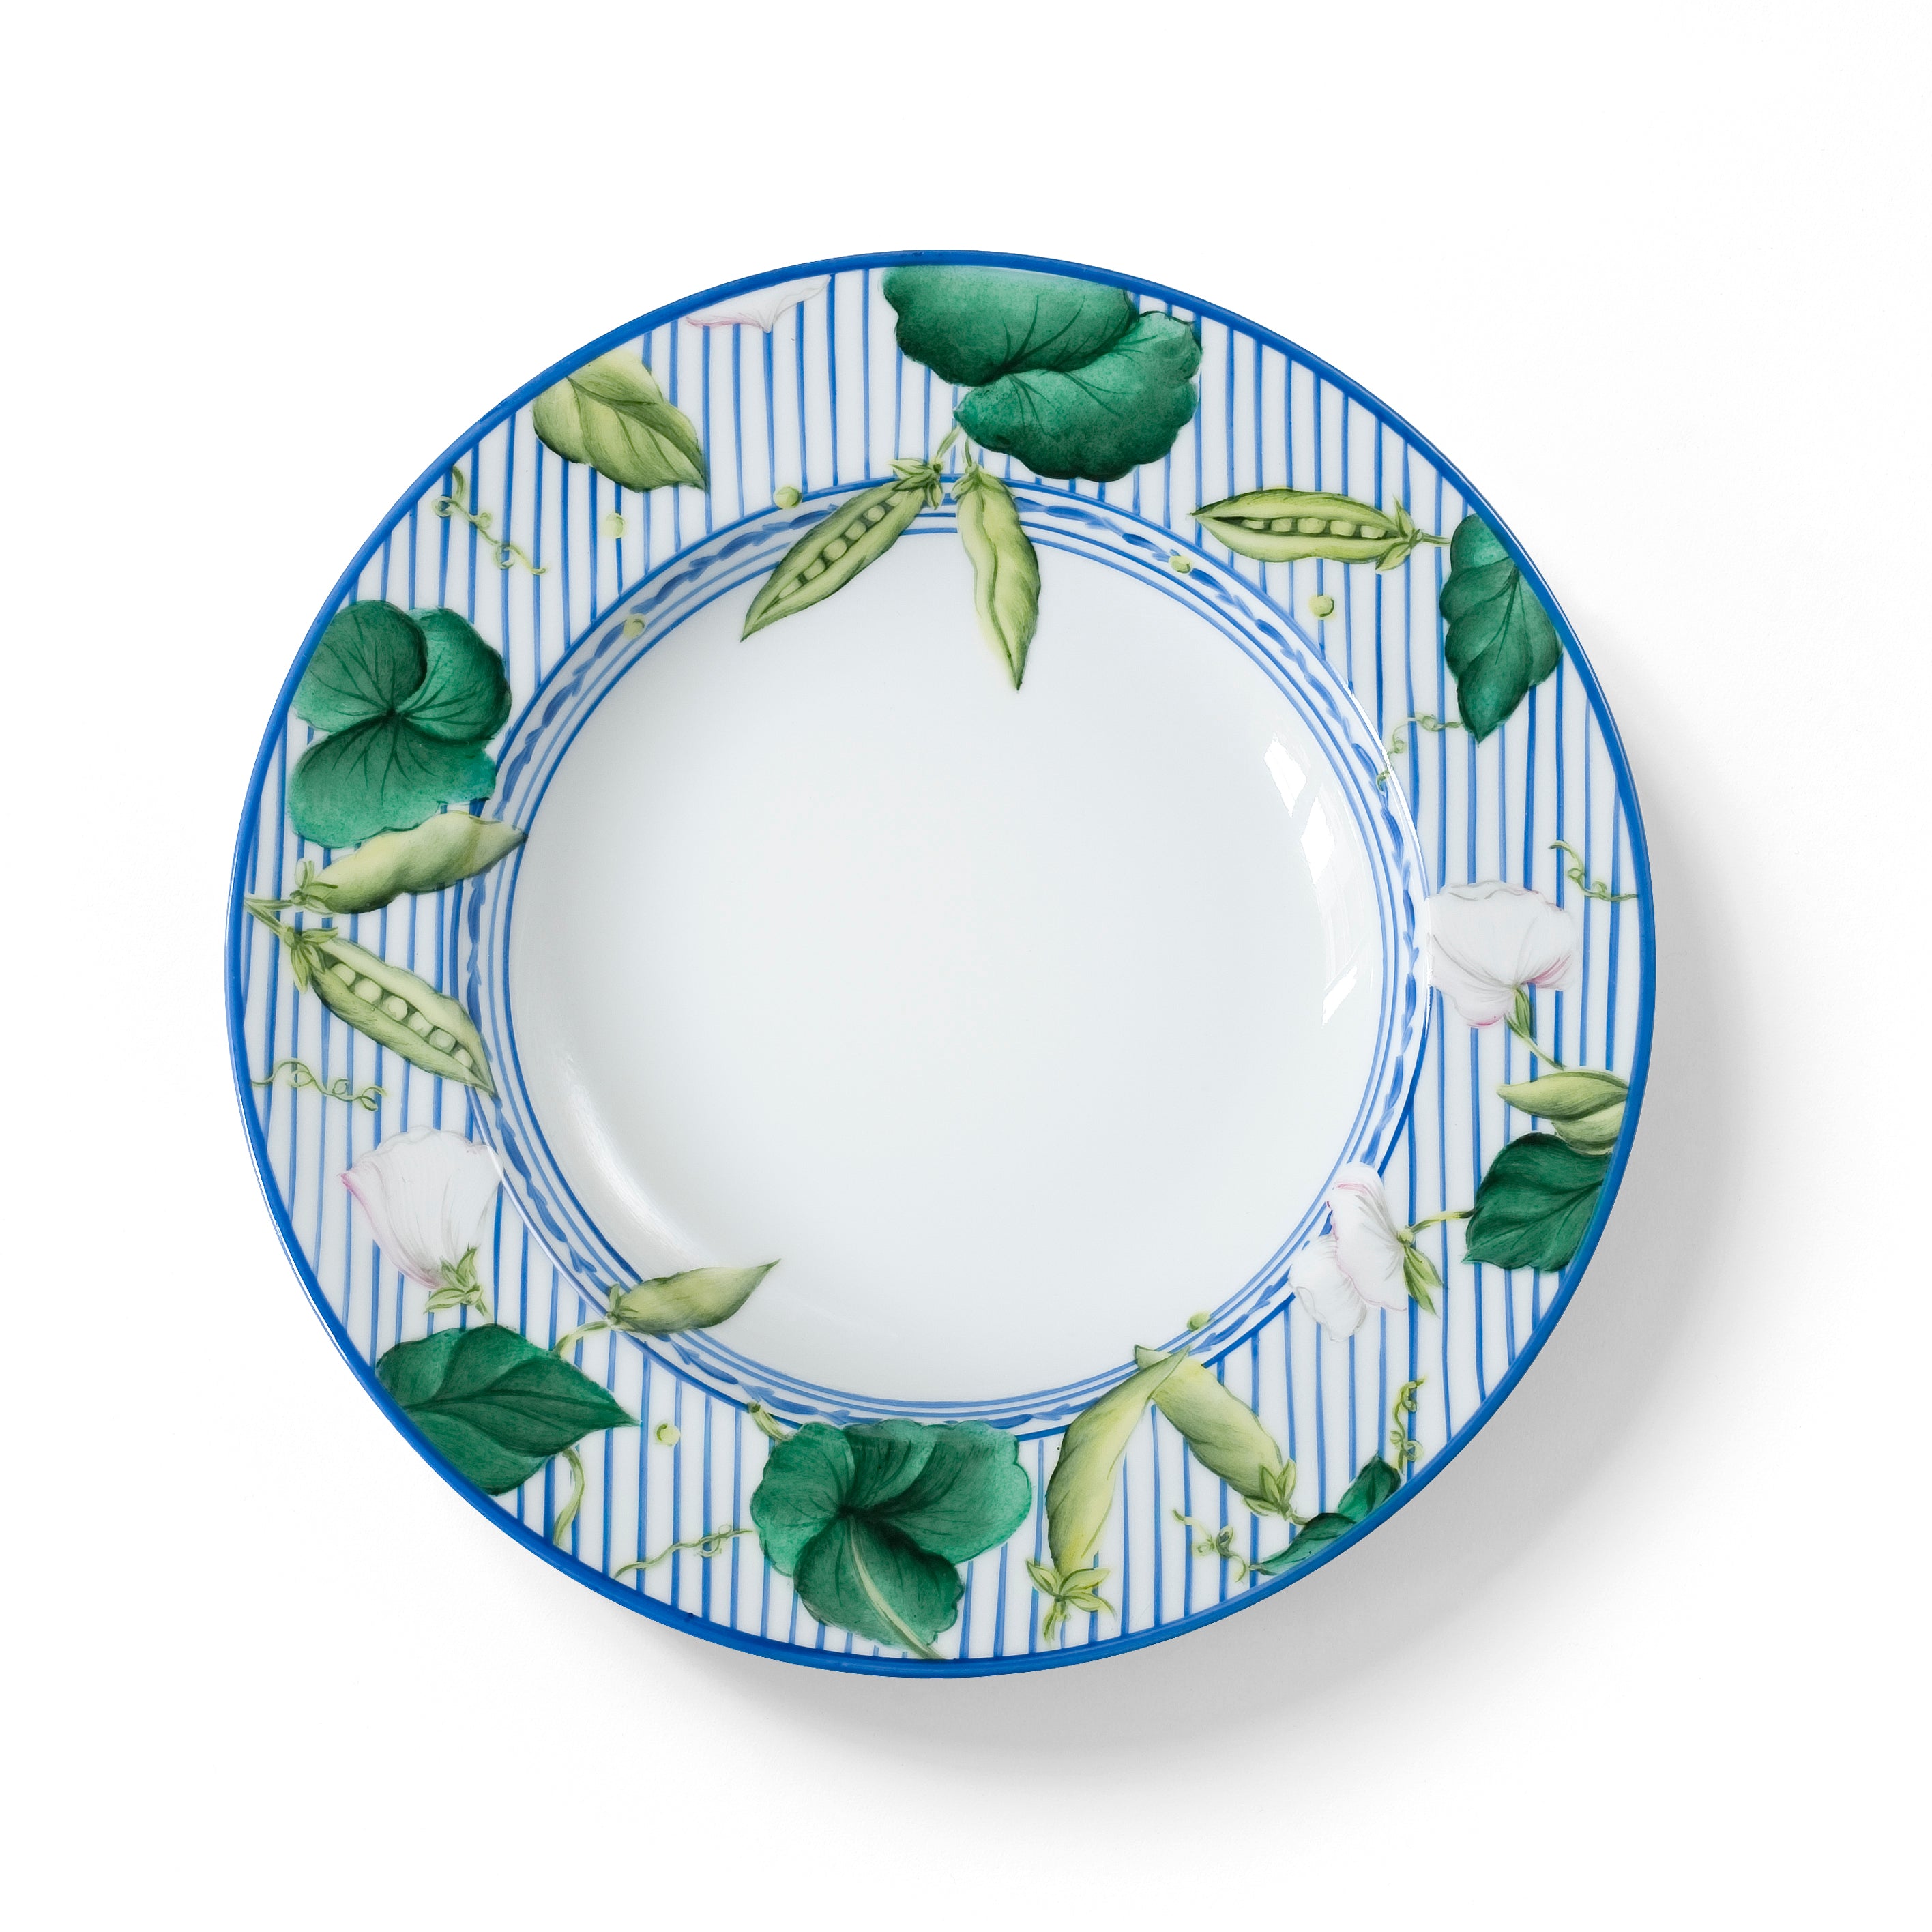 Potager in Blue - Soup plate
